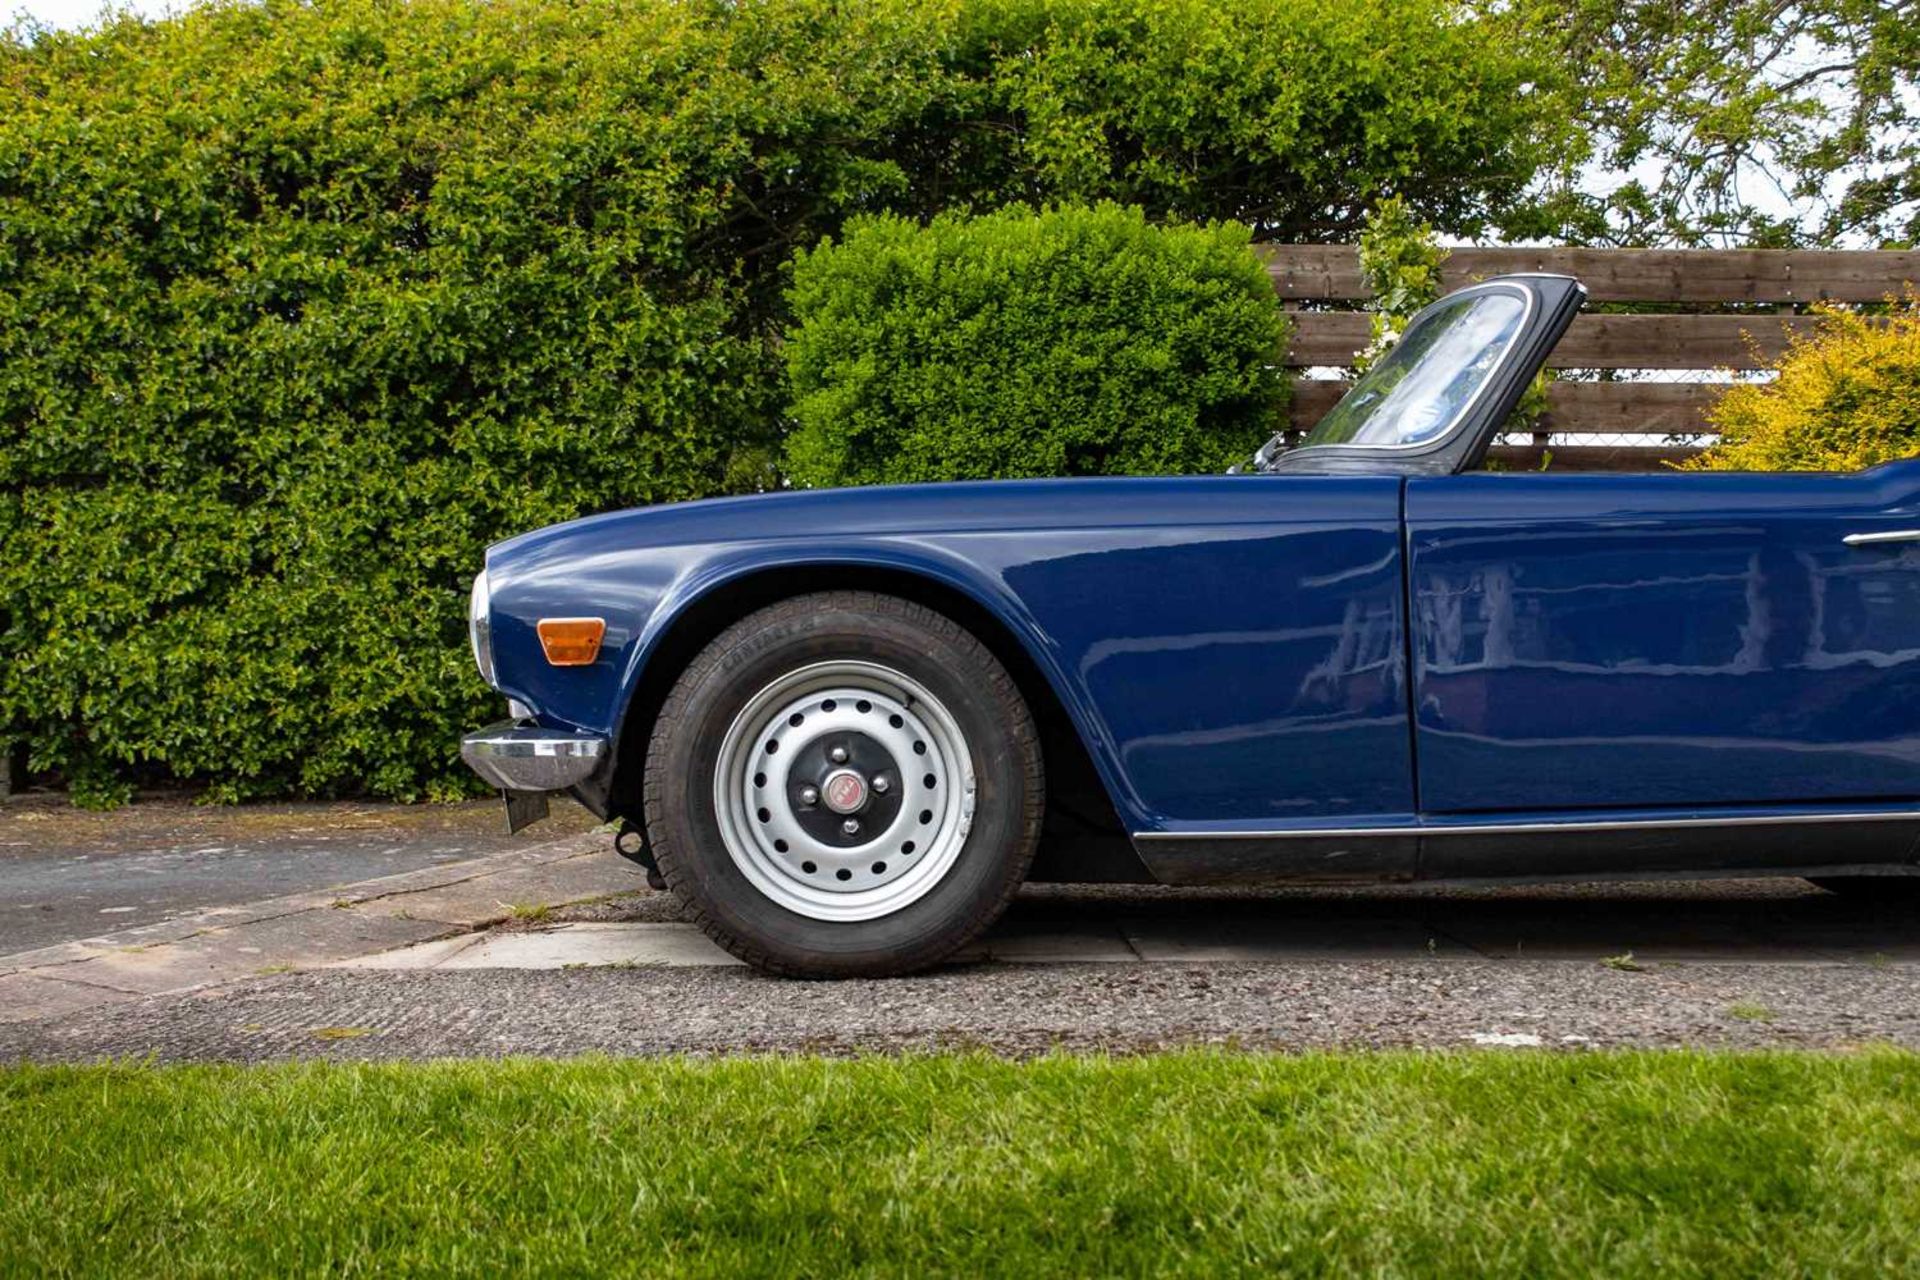 1972 Triumph TR6 Home market example, specified with manual overdrive transmission - Image 34 of 95